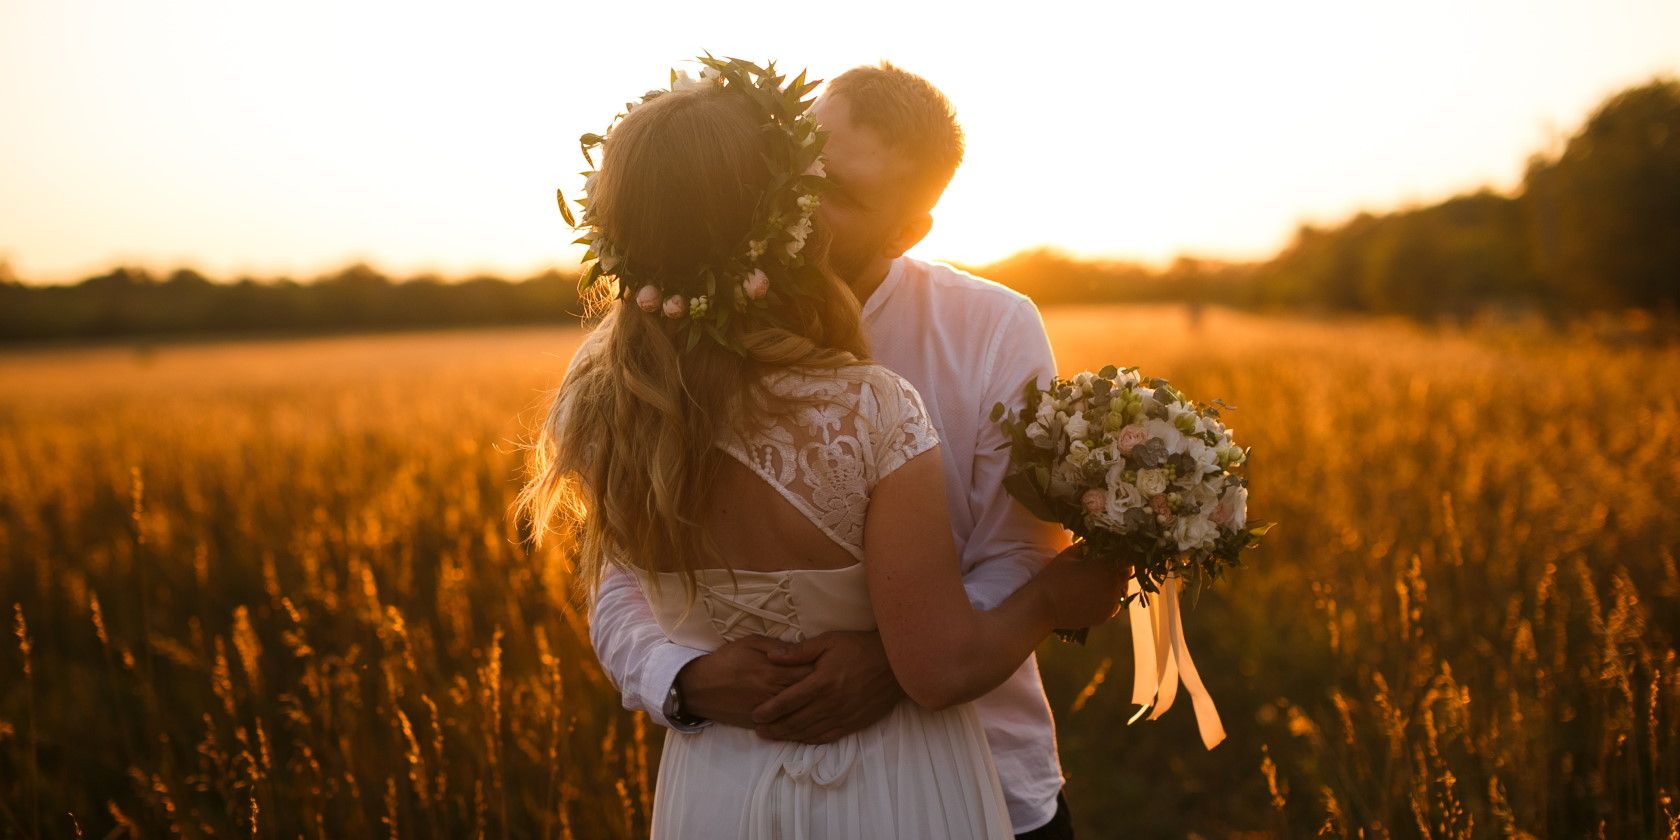 Bride and groom embracing in field during sunset